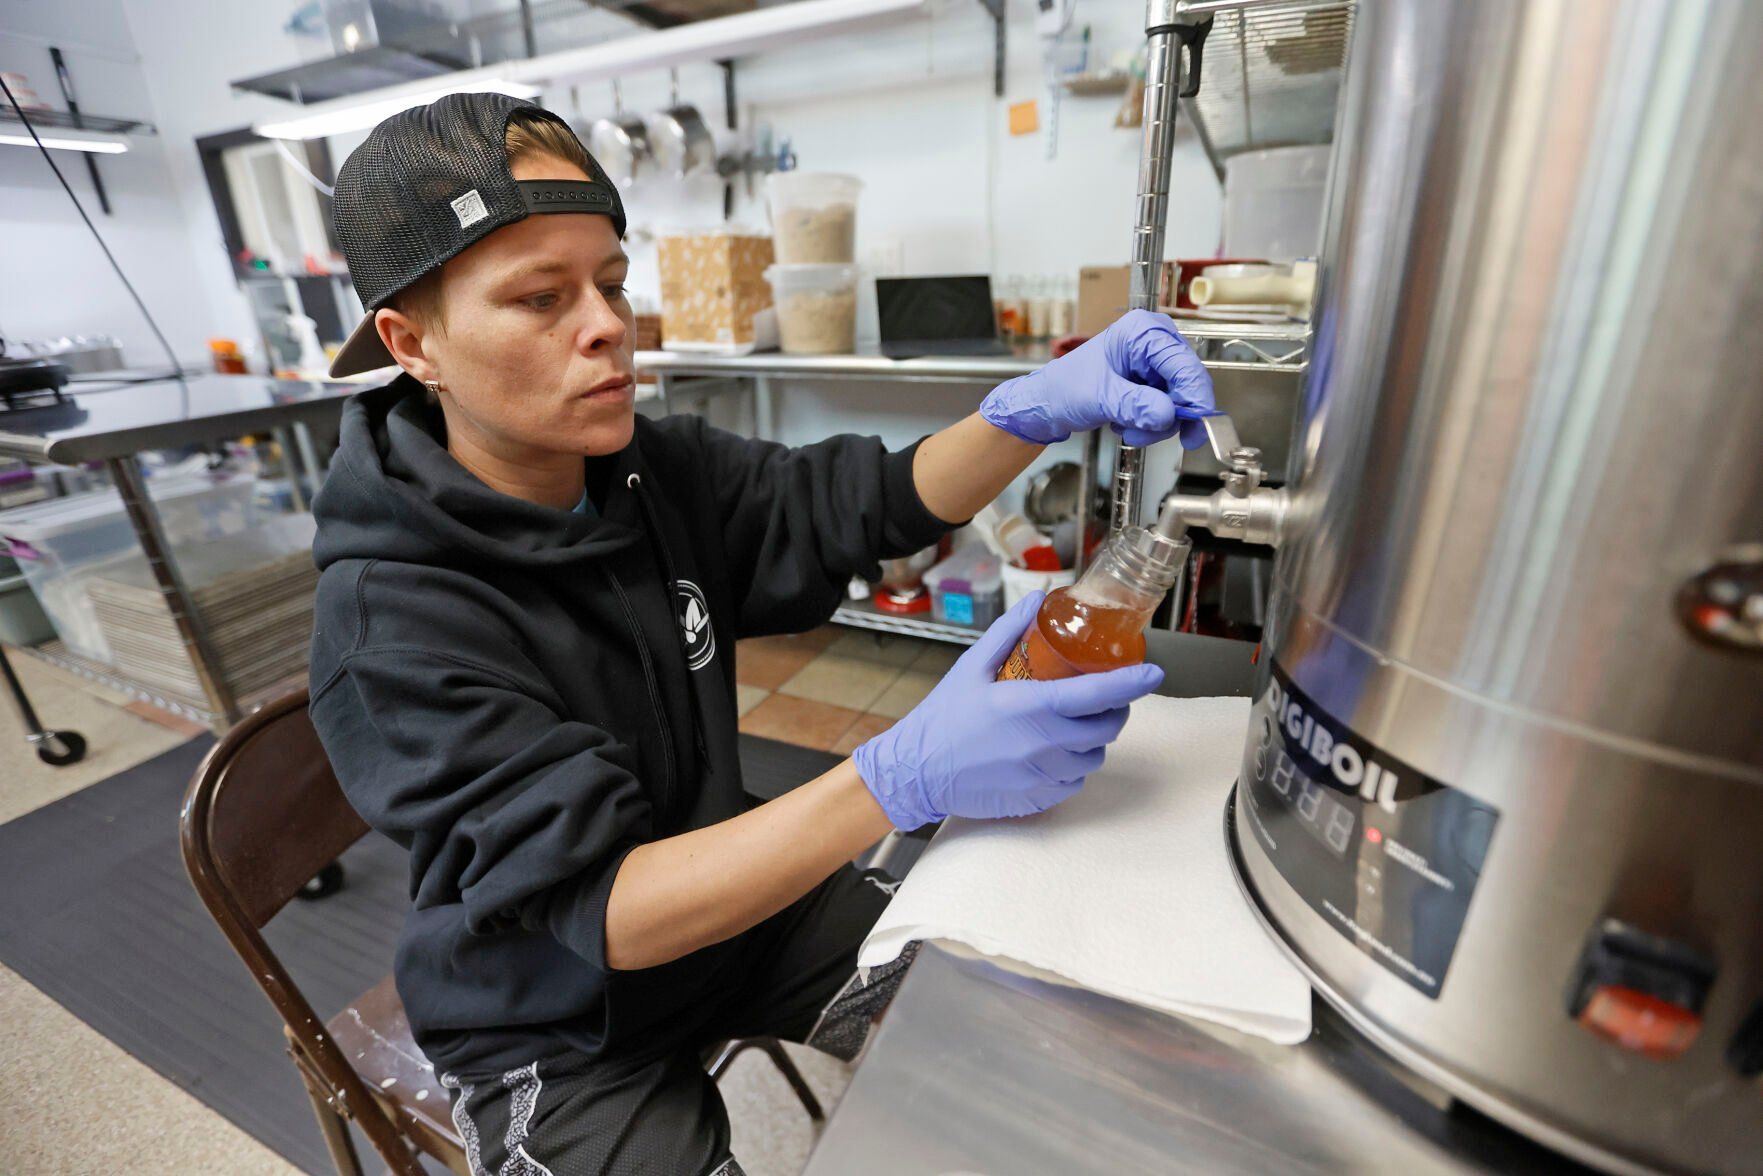 Shawna Dole fills bottles with product at River Bluff Collective in East Dubuque, Ill., on Thursday, April 13, 2023.    PHOTO CREDIT: JESSICA REILLY
Telegraph Herald